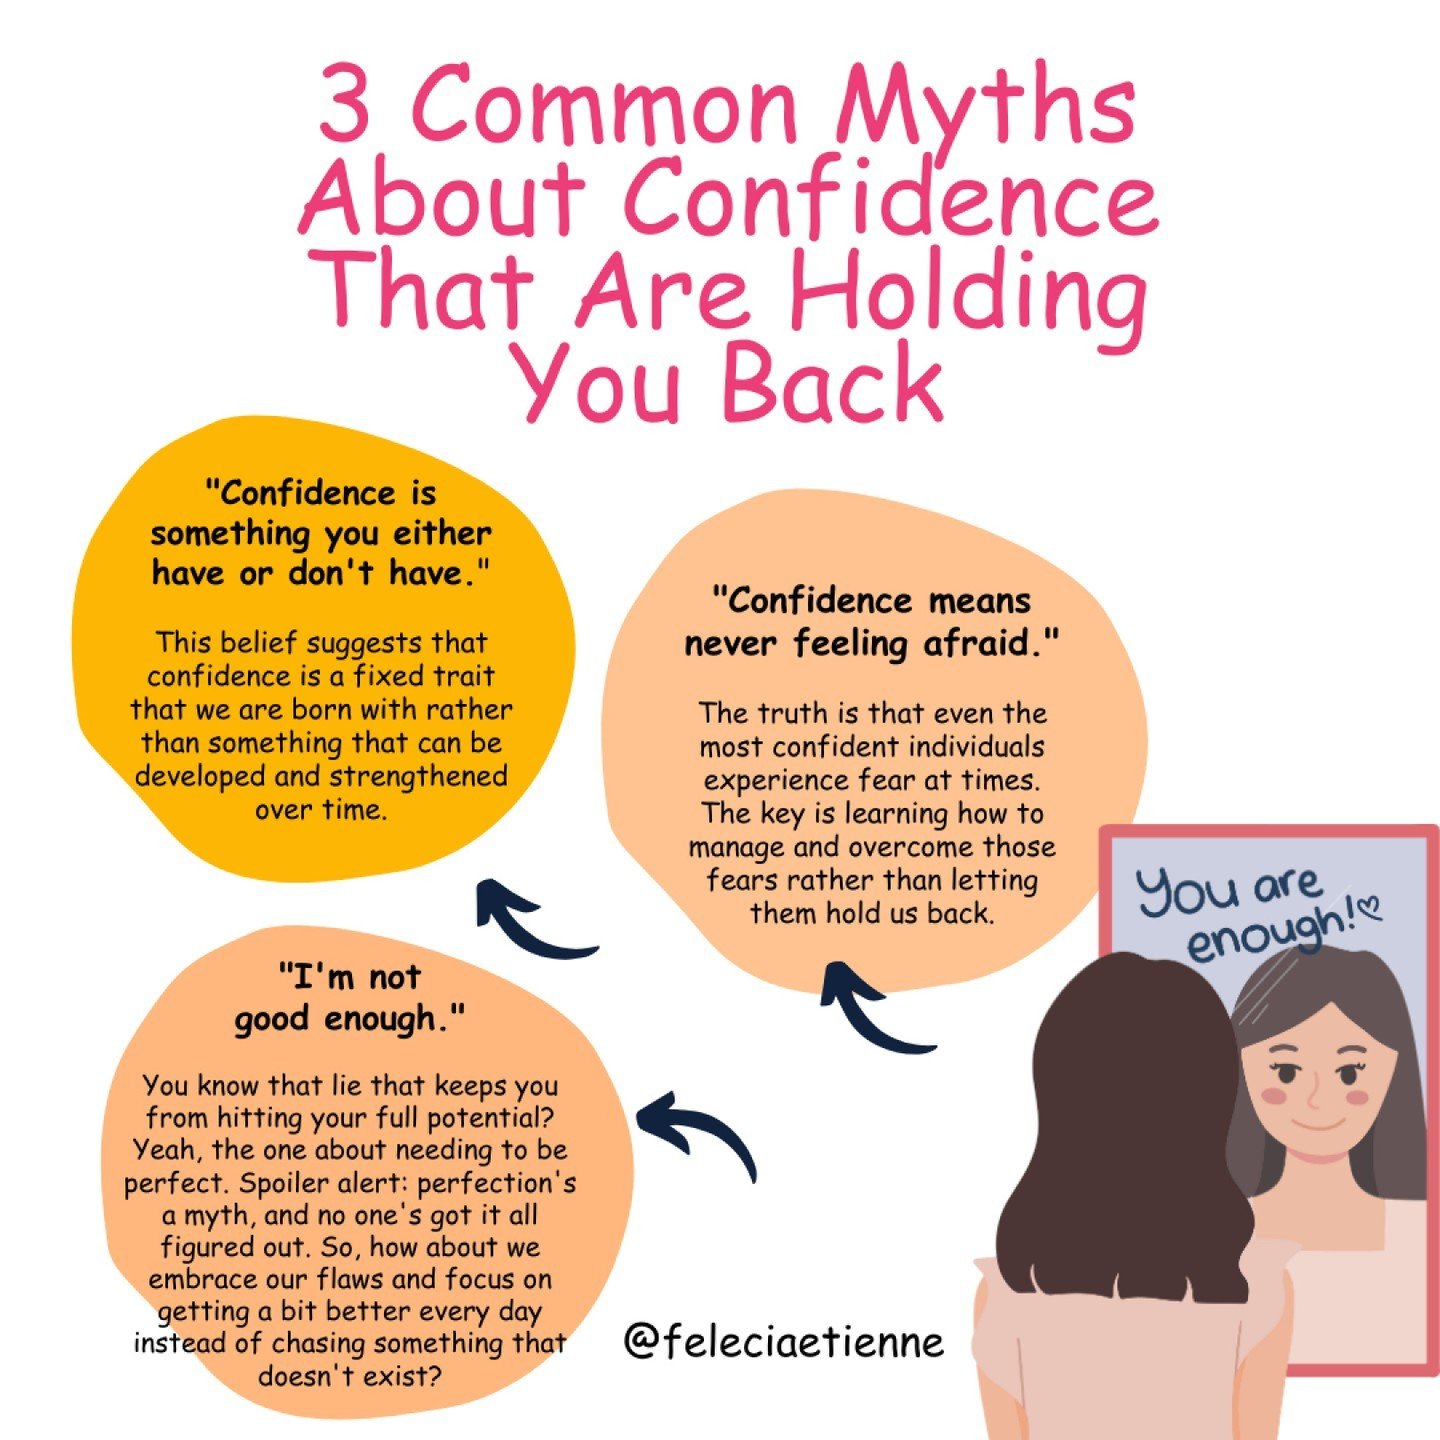 🌟 Let's debunk the myths holding you back to help you break free and reclaim your confidence.

👉 &quot;I'm Not Good Enough&quot;: This lie convinces you that others are more capable or deserving. The truth? Everyone has unique strengths and weaknes